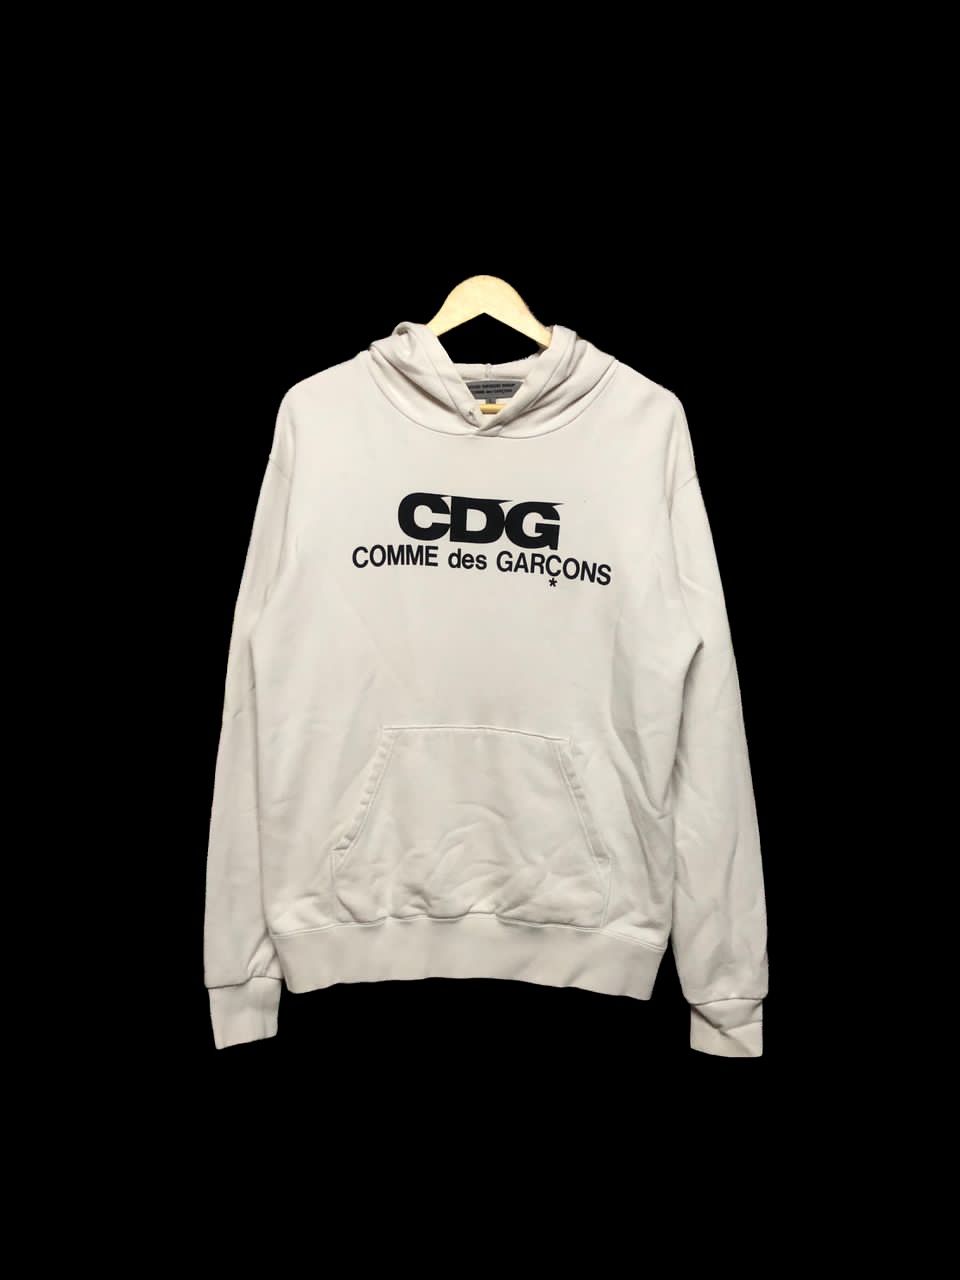 AD2016🔥Cdg X Good Shop Design Spellout Pullover Hoodies - 1